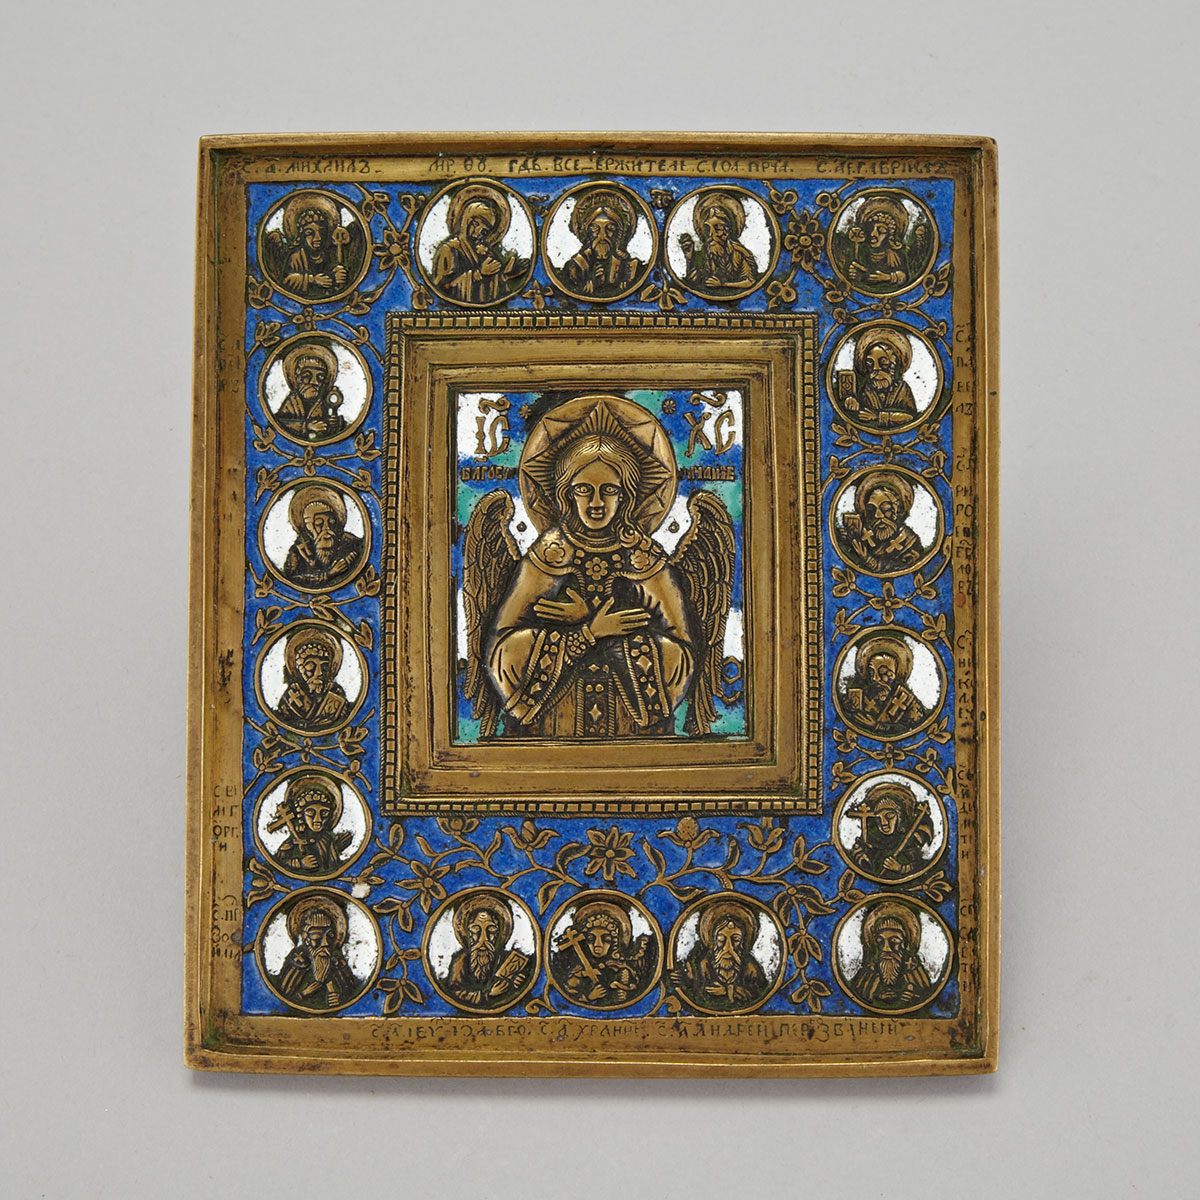 Russian Polychrome Enamelled Bronze Travelling Icon of The Blessed Silence, 19th century